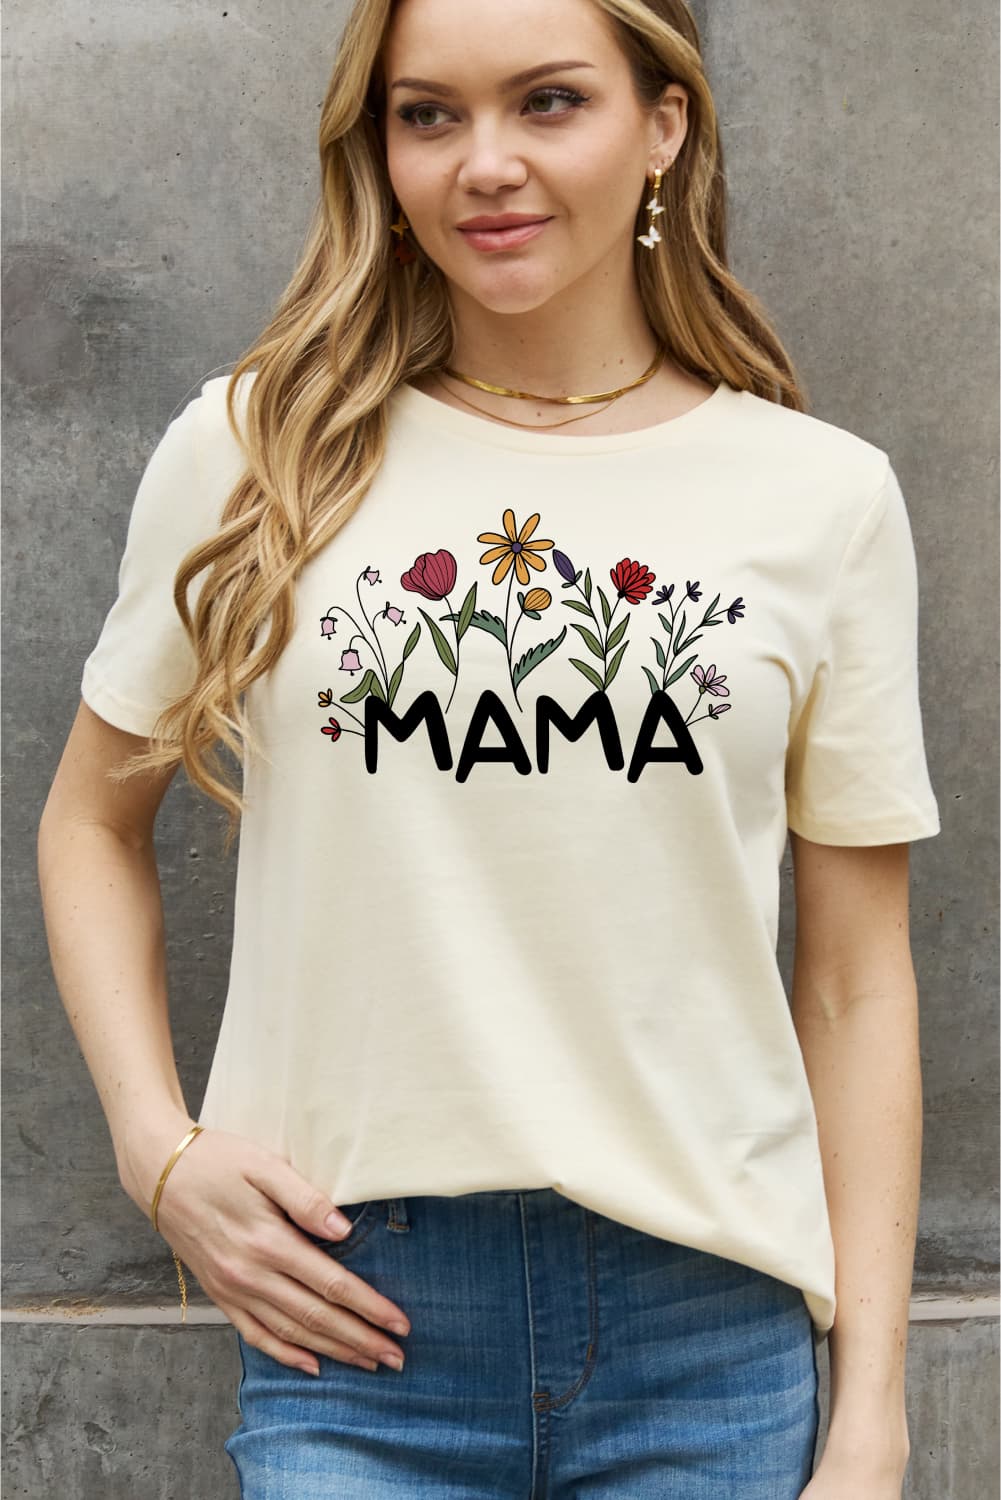 Simply Love Full Size MAMA Flower Graphic Cotton Tee